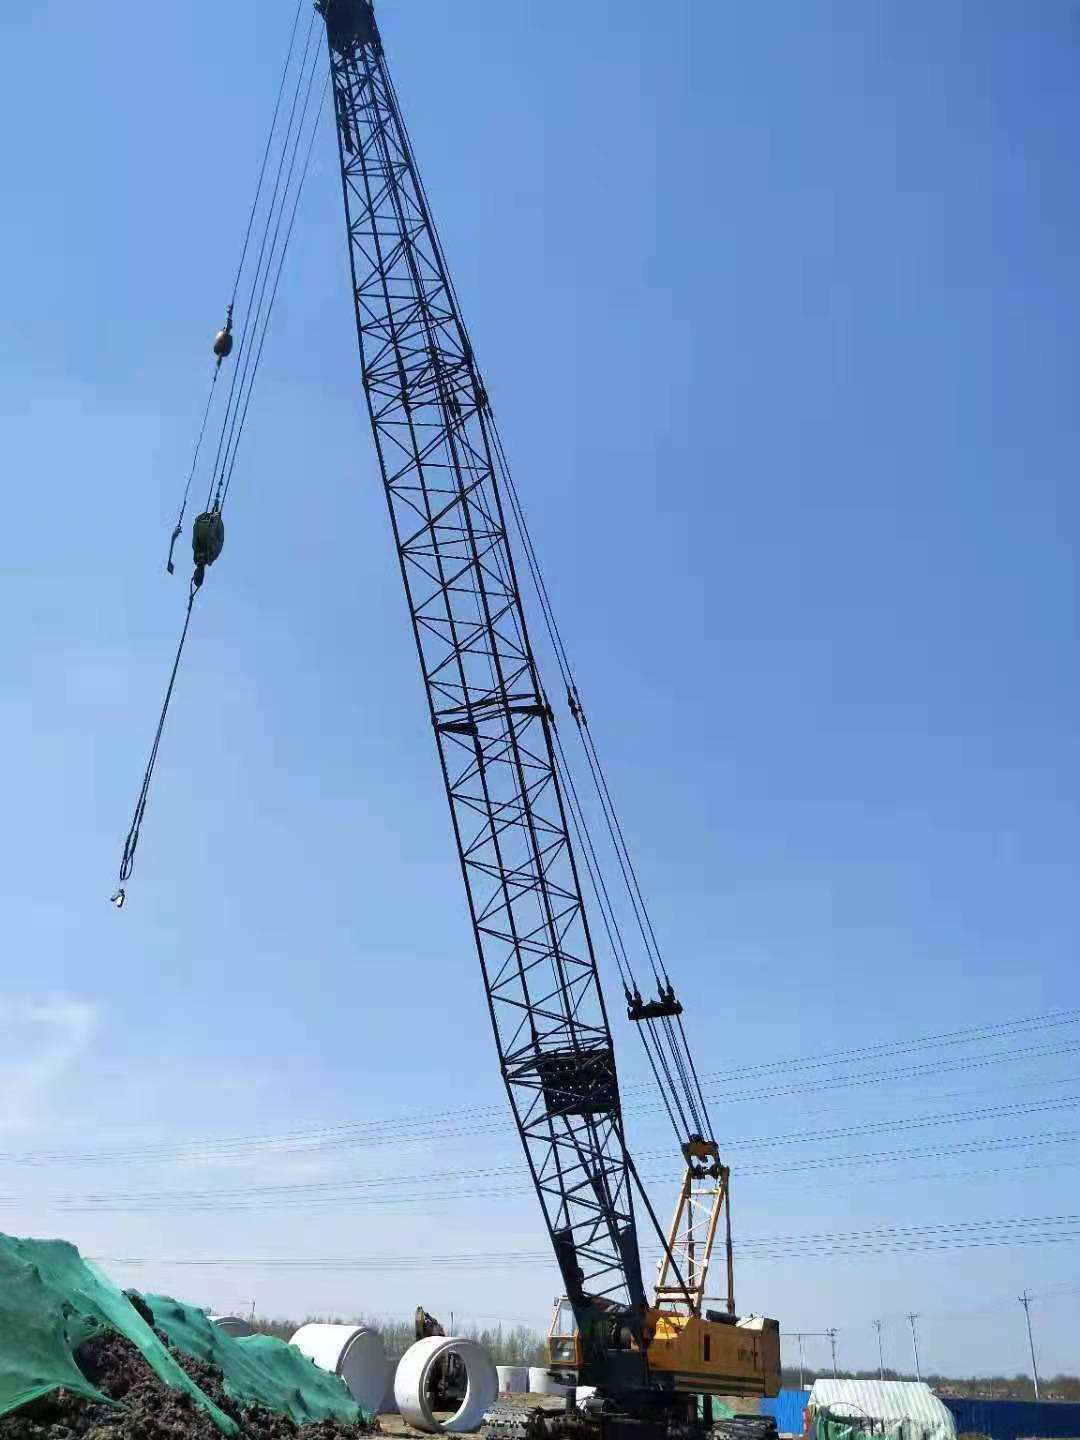 Hitachi 150Ton KH700-2 Japanese Used Crawler Crane which in China for sale now,pls check attached photos and details as below: